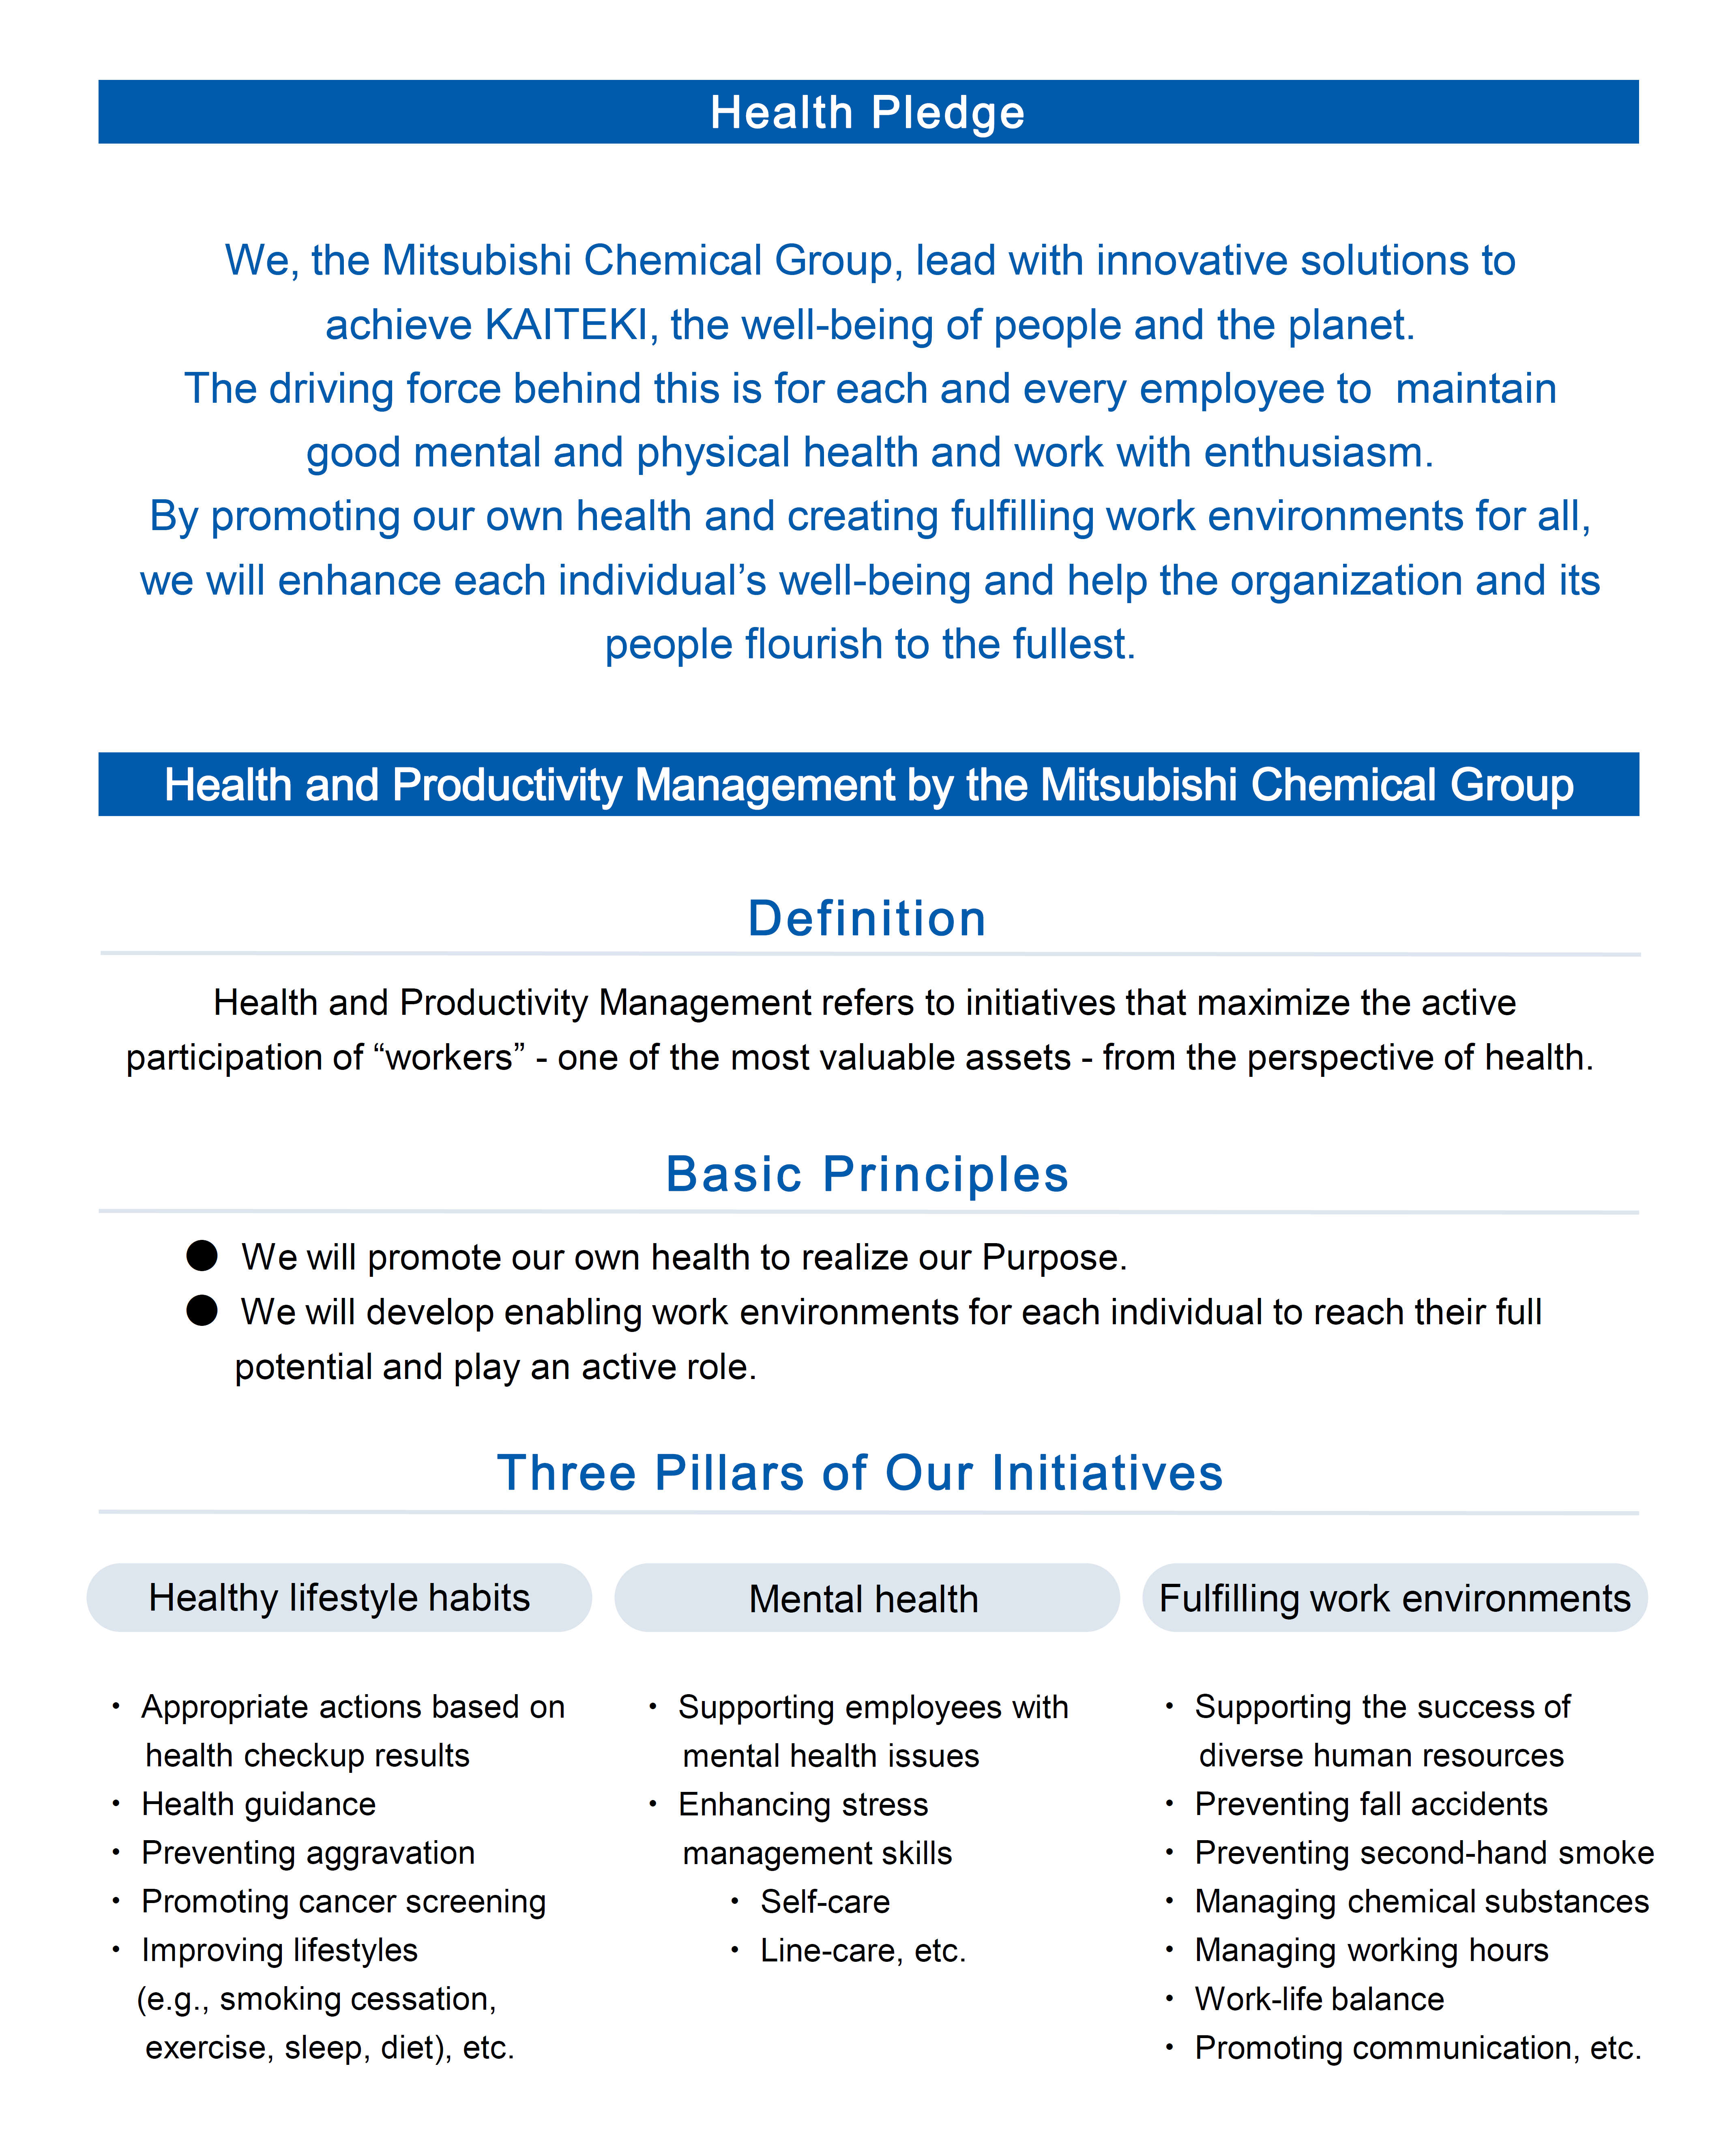 Health Pledge, Health and Productivity Management by the Mitsubishi Chemical Group